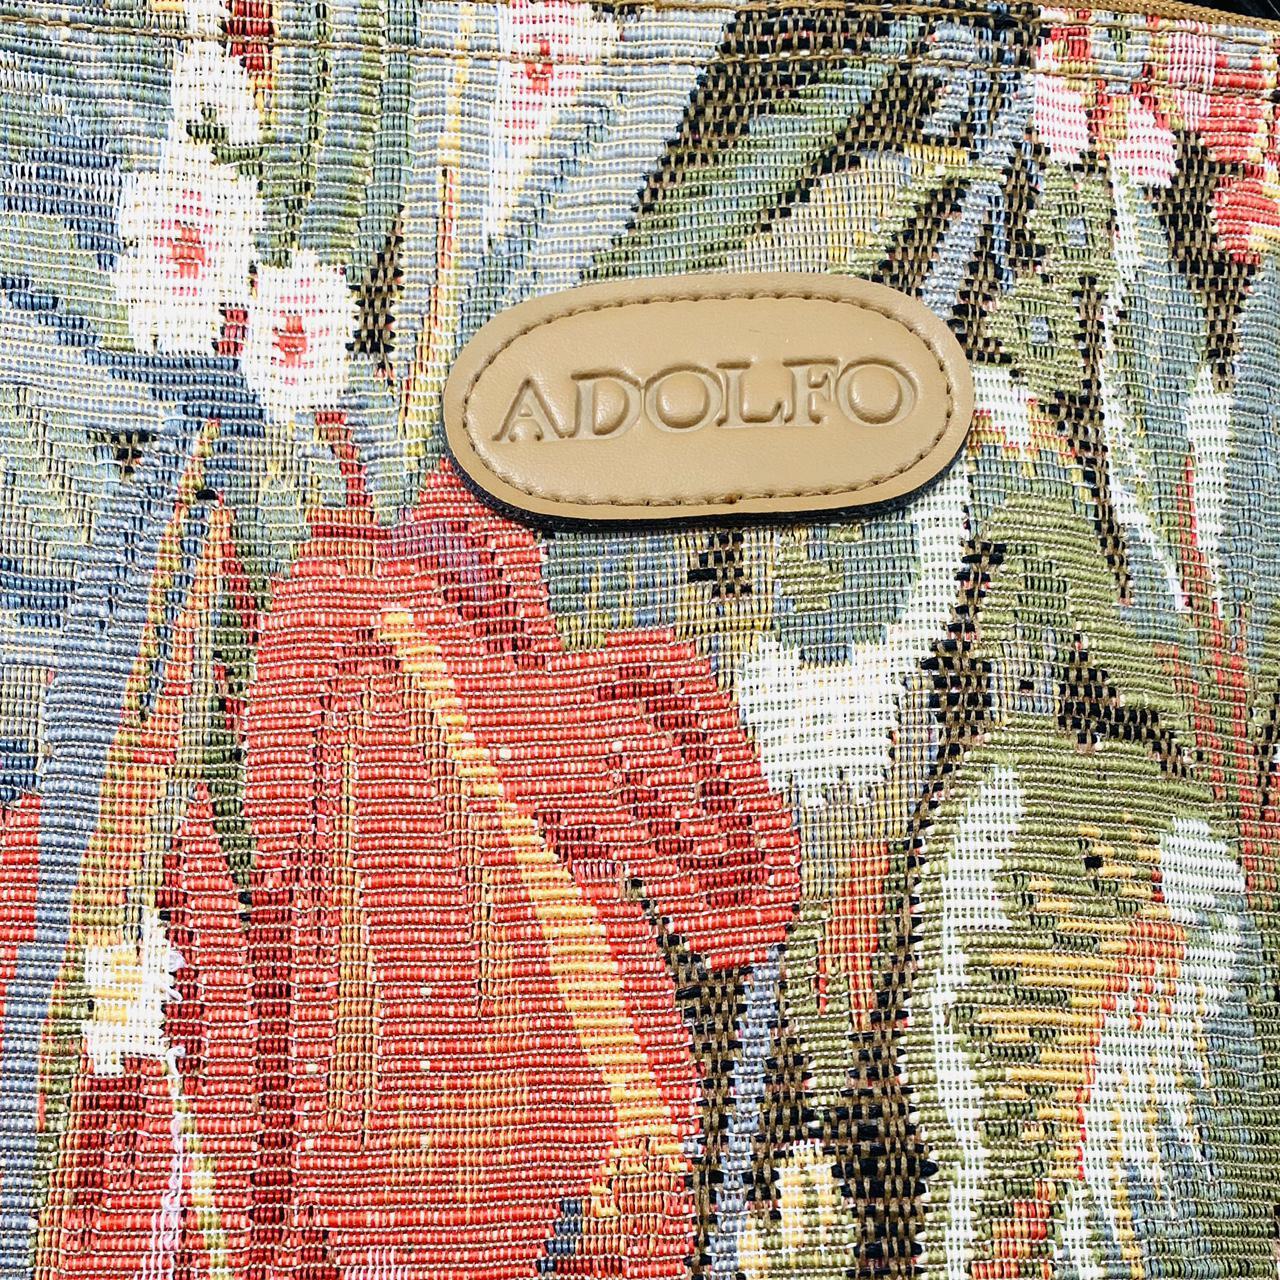 Product Image 3 - Adolfo floral zipper bag

- Made